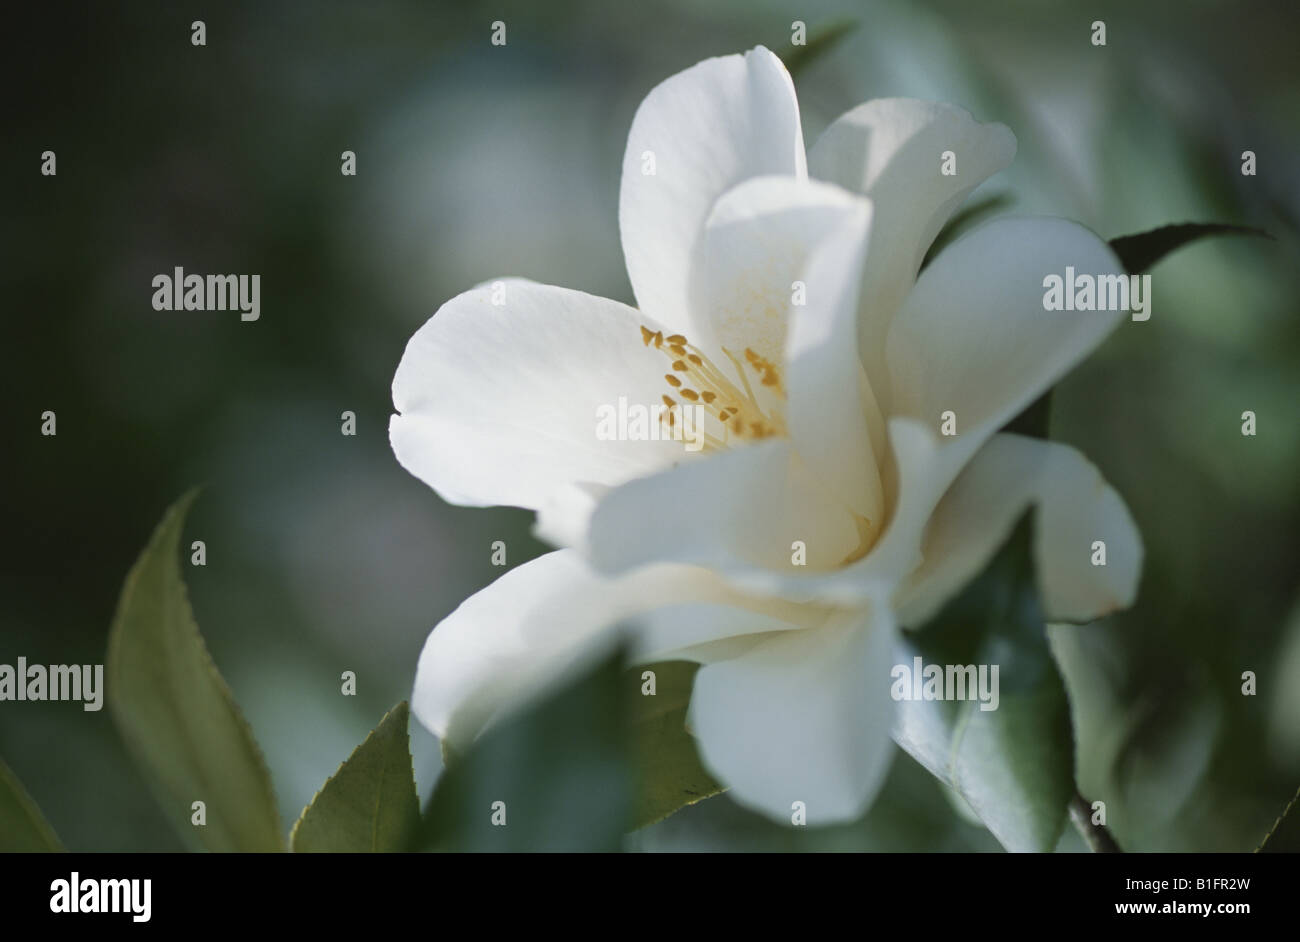 The Flower Of A Camellia Stock Photo